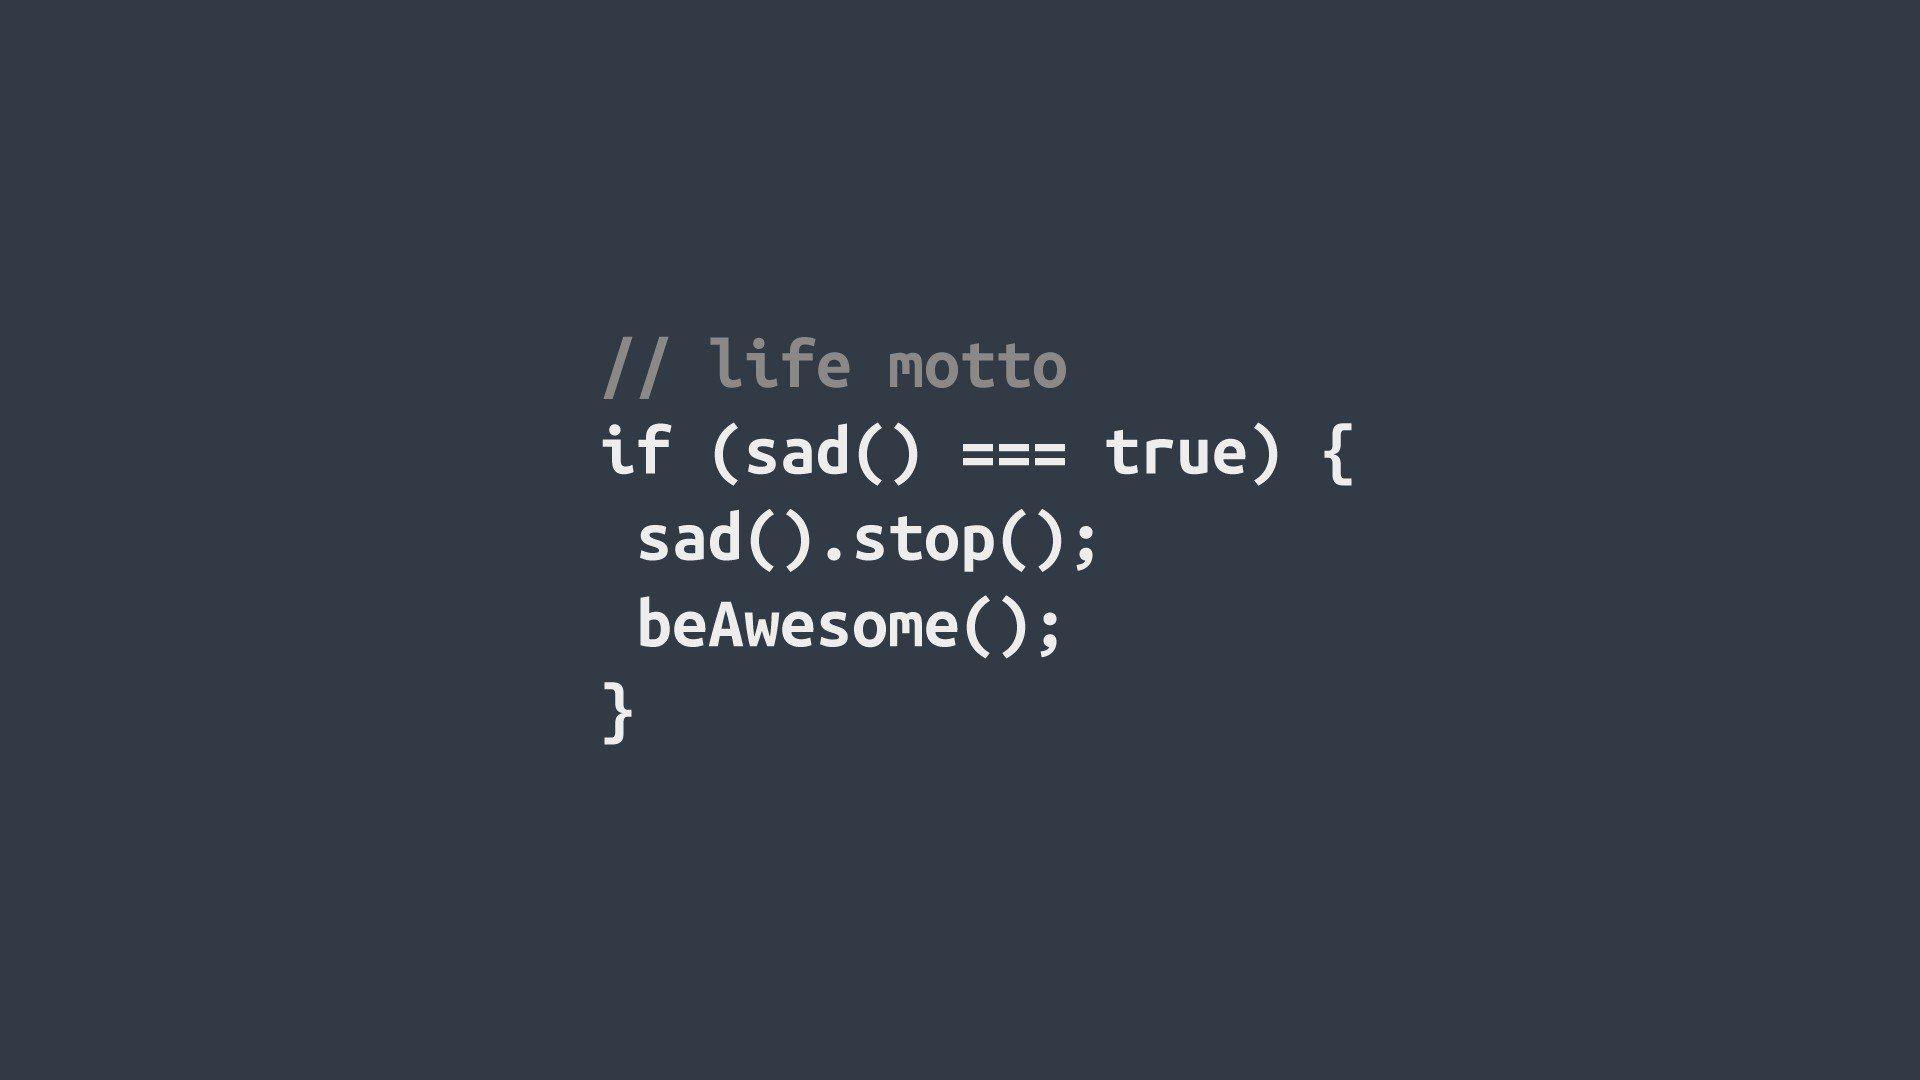 Computer Quotes For Students. QuotesGram. Life motto, Code